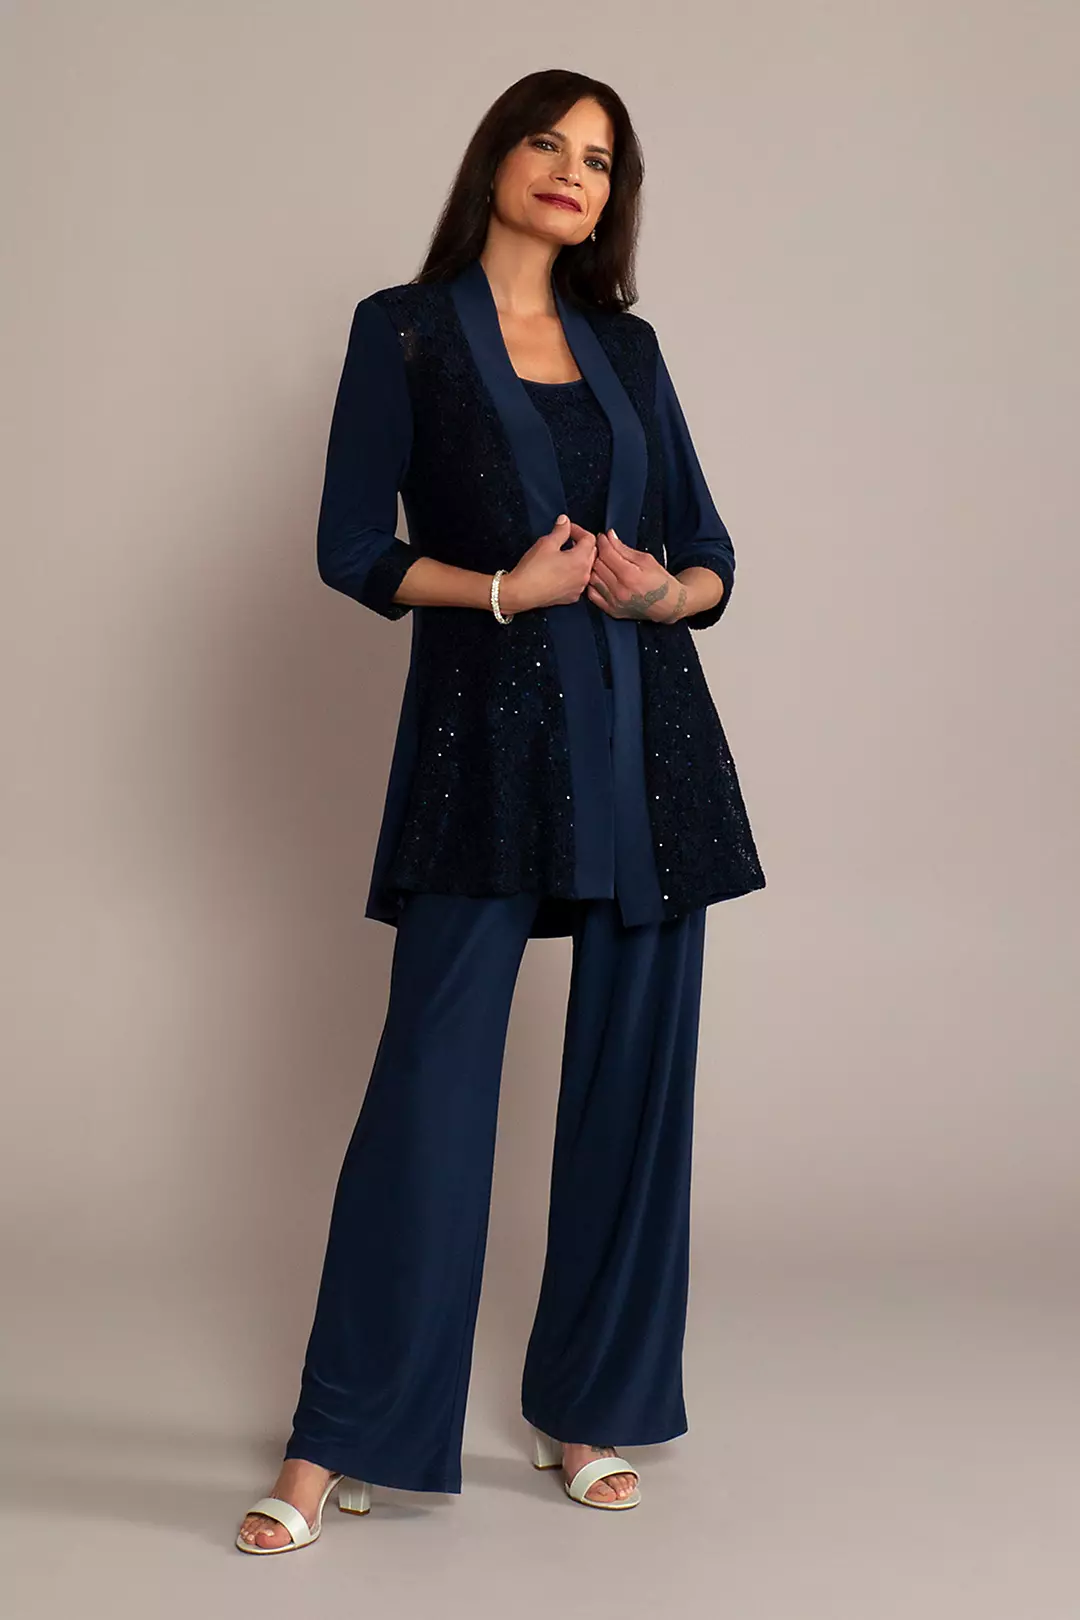 Sequin Lace and Jersey Three-Piece Pantsuit Image